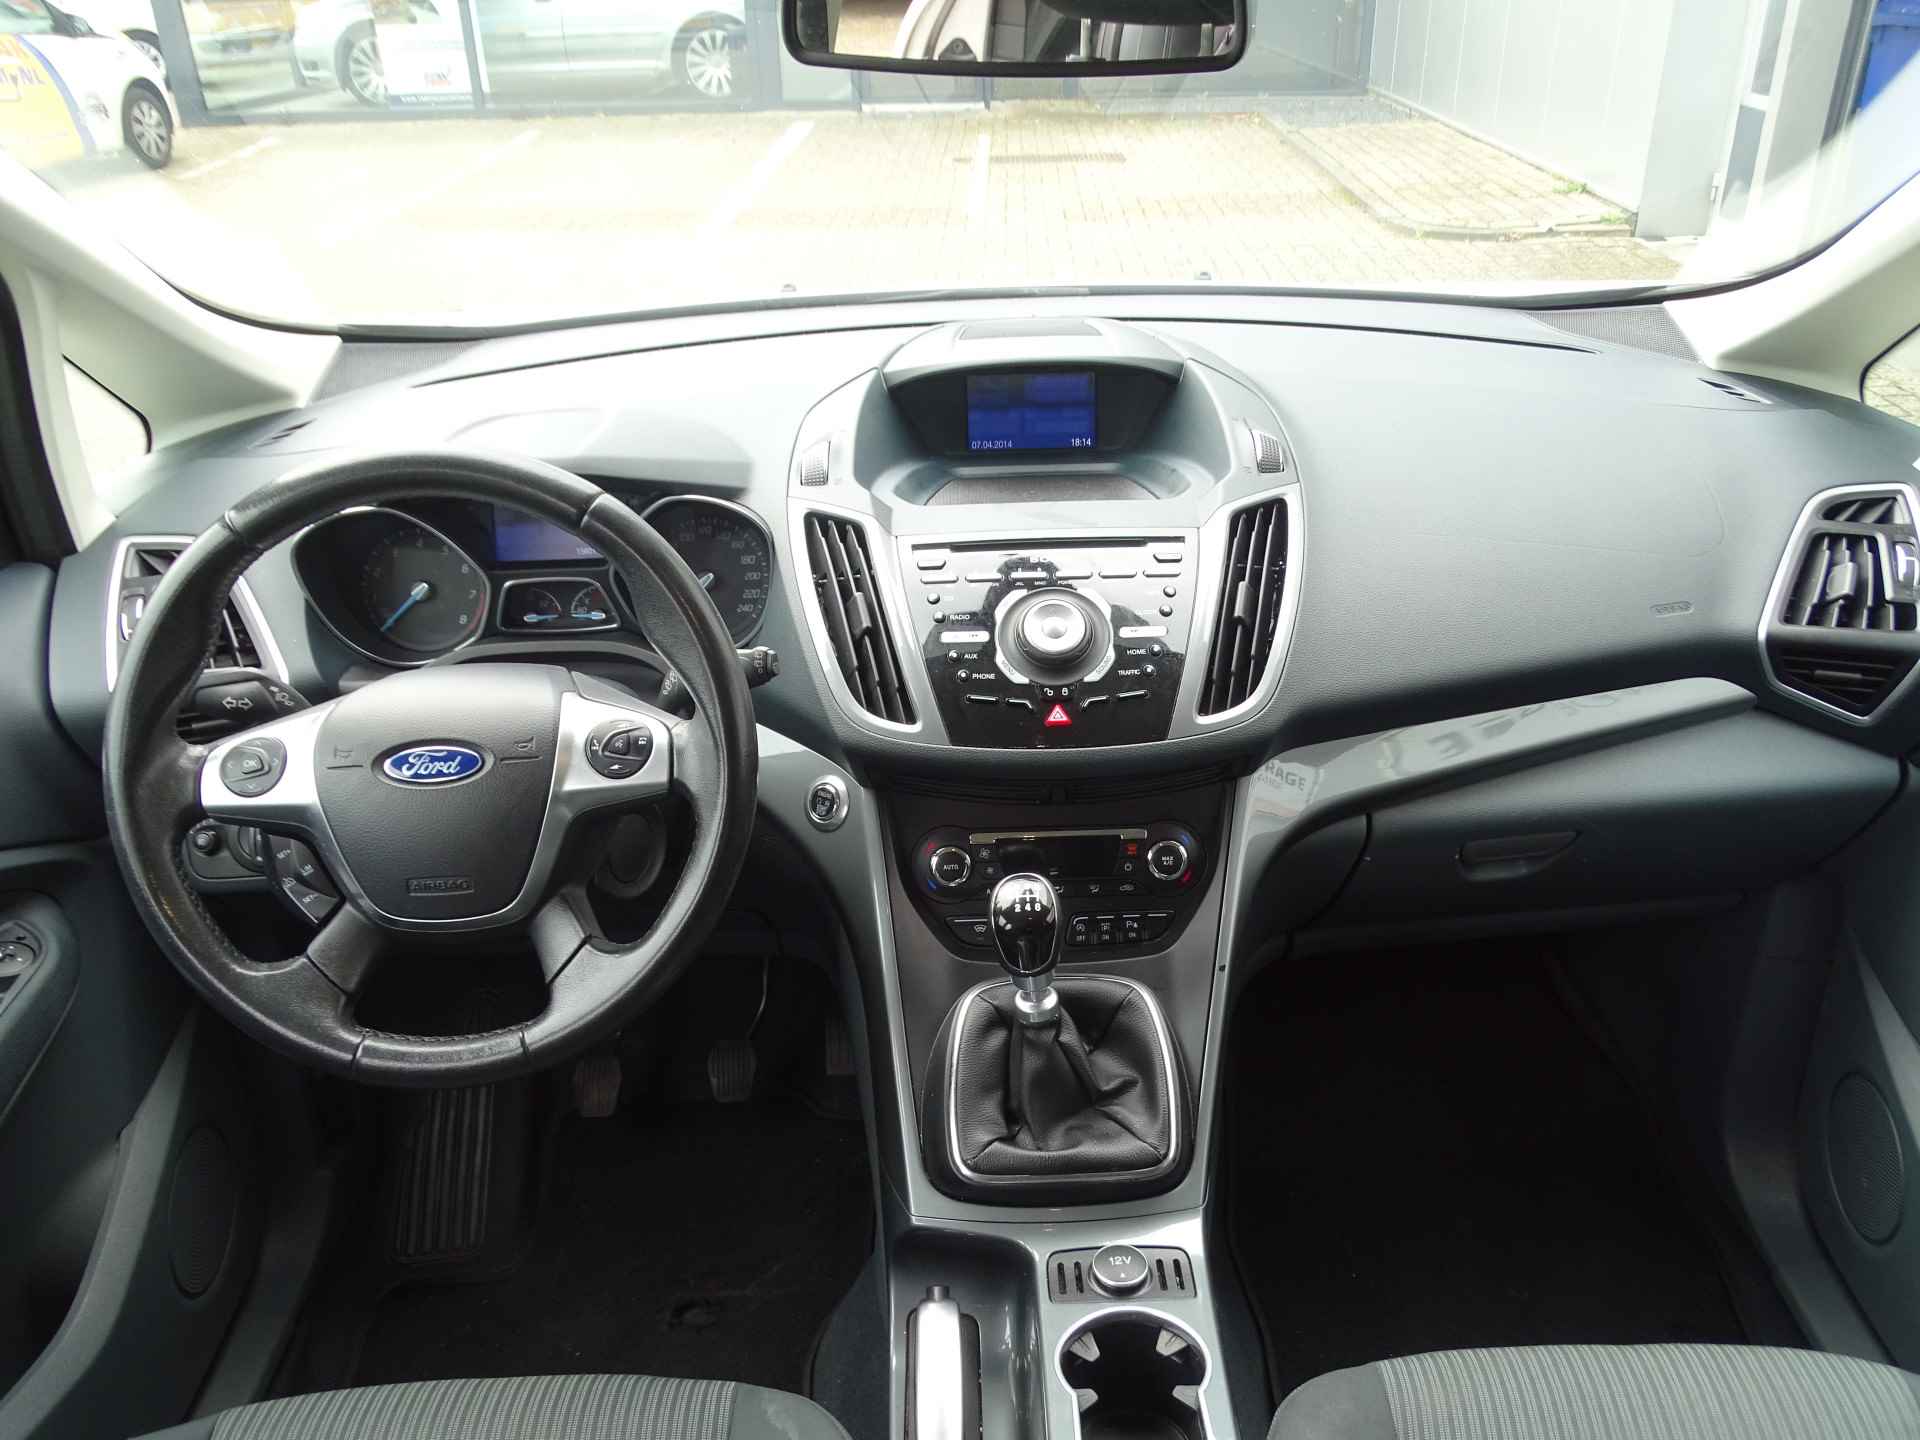 Ford Grand C-Max 1.0 Ed Plus 7 PERSOONS, Cruise Control, Camera, Compleet, NAP! - 4/70